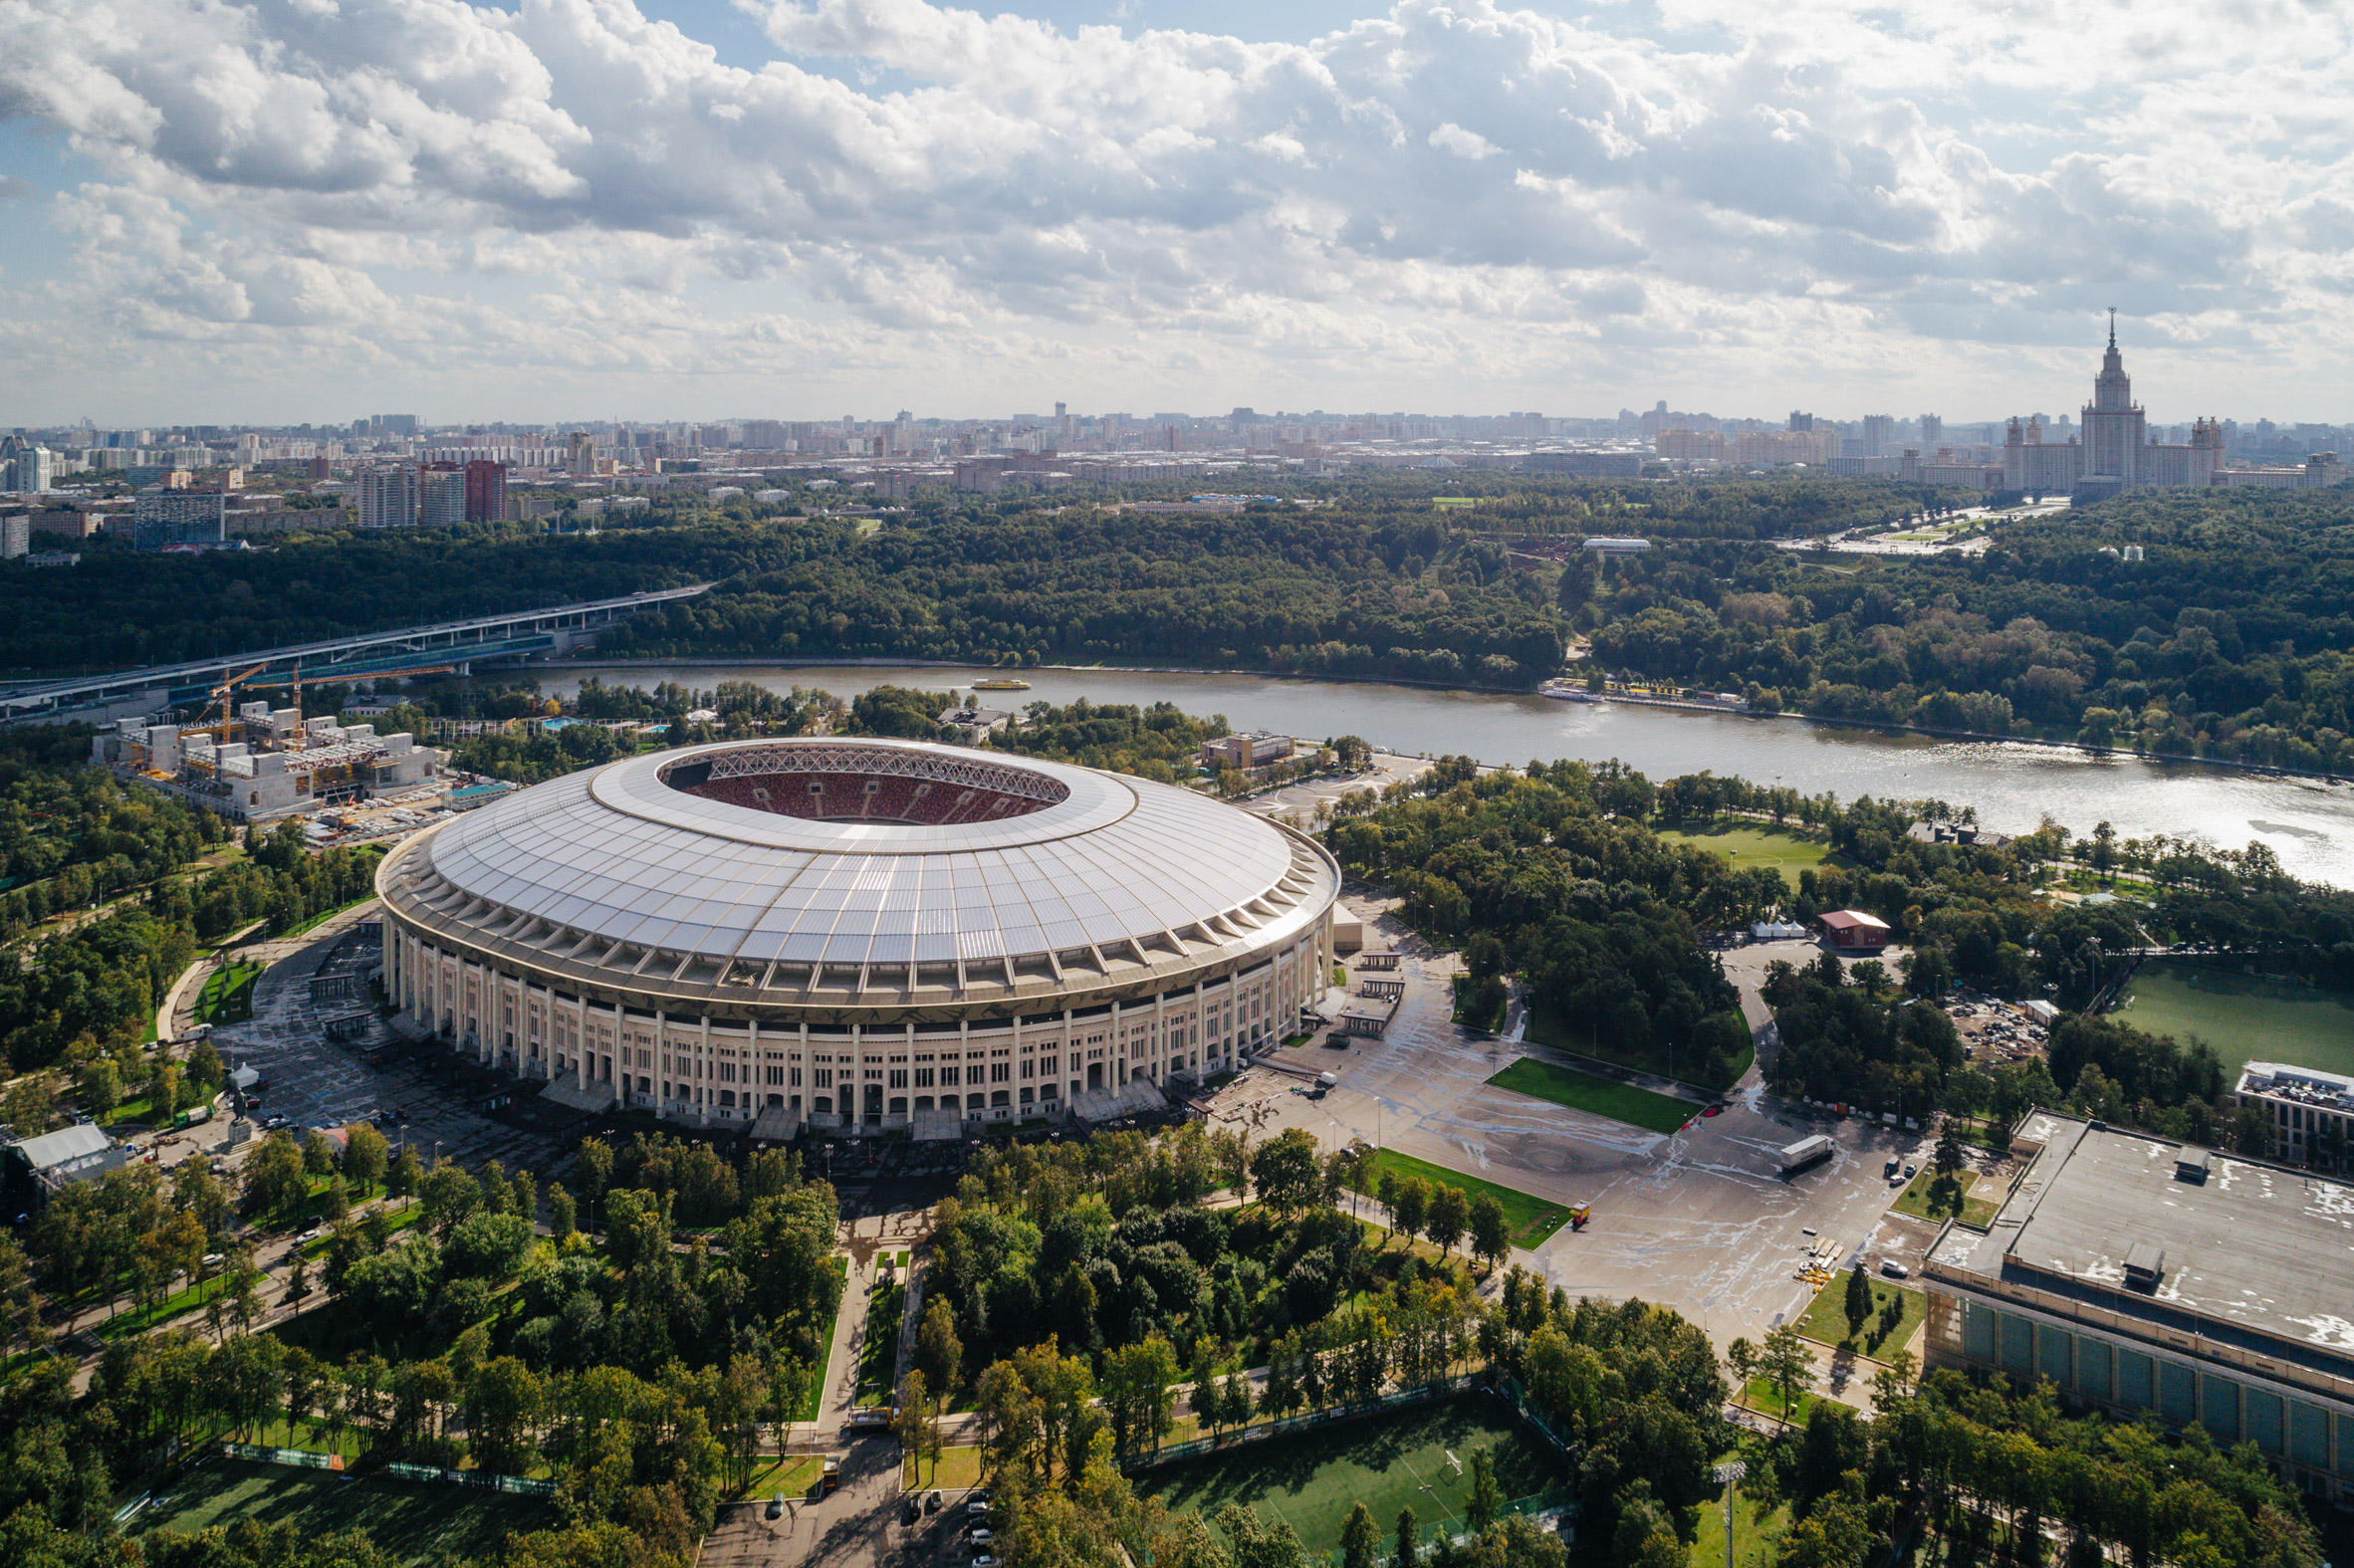 Moscow's historic Luzhniki Stadium refurbished for World Cup 2018 Dr